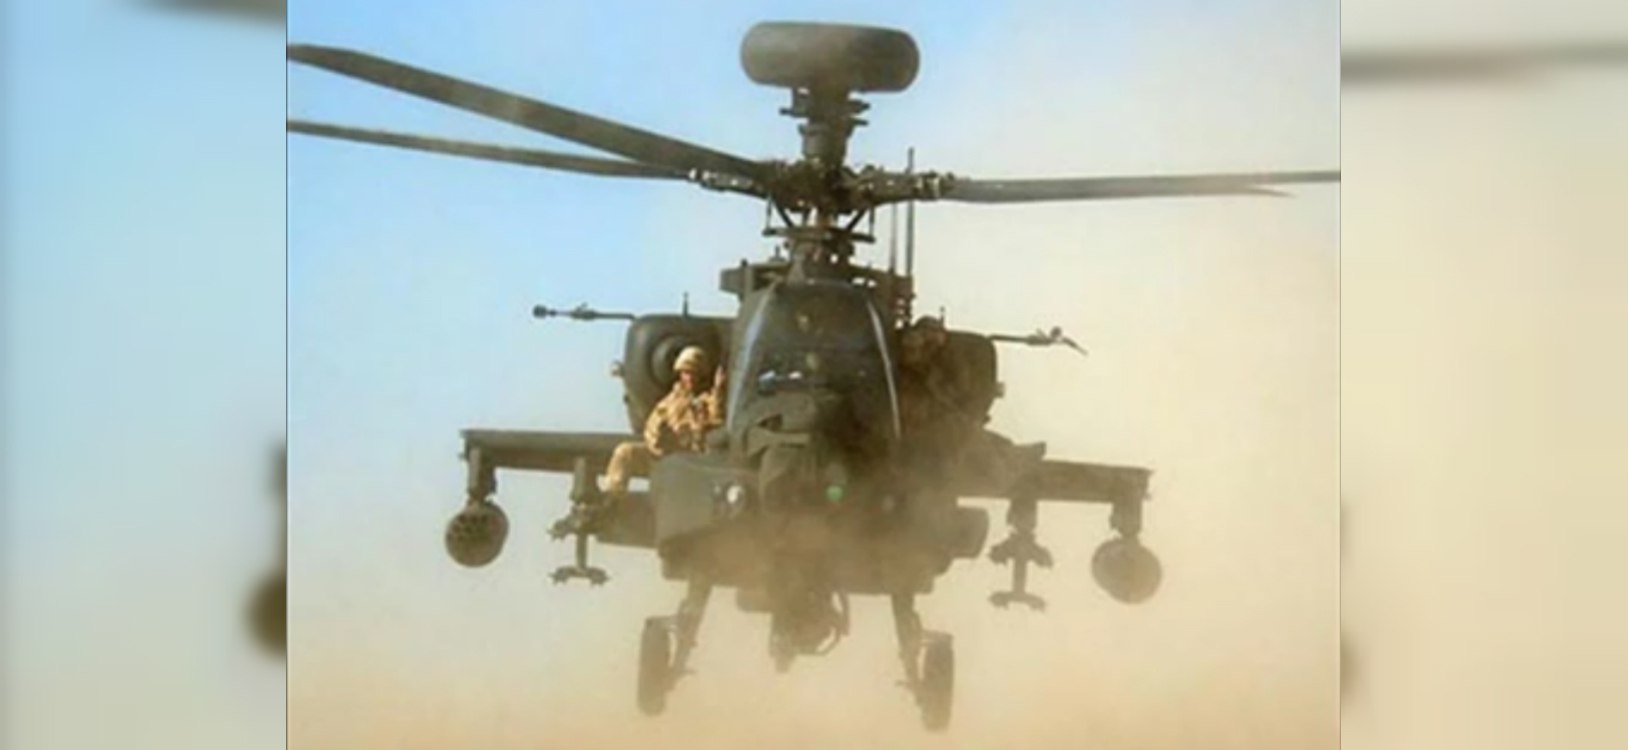 This is how Royal Marines used Apaches as troop transports during a rescue mission